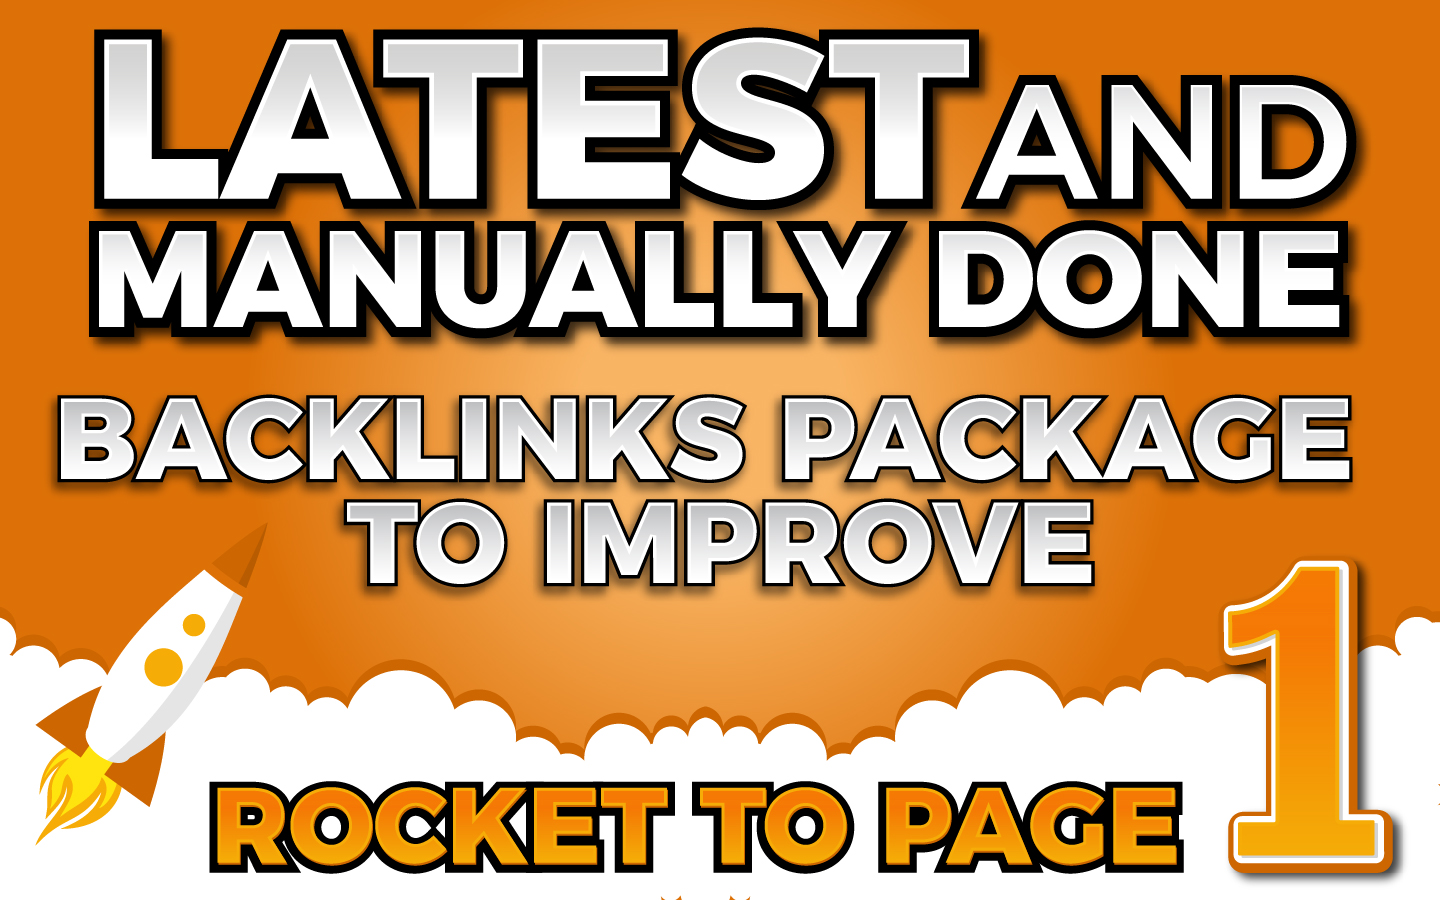 Latest And Manualy Done Backlinks Package To Improve Your Ranking Toward Page 1